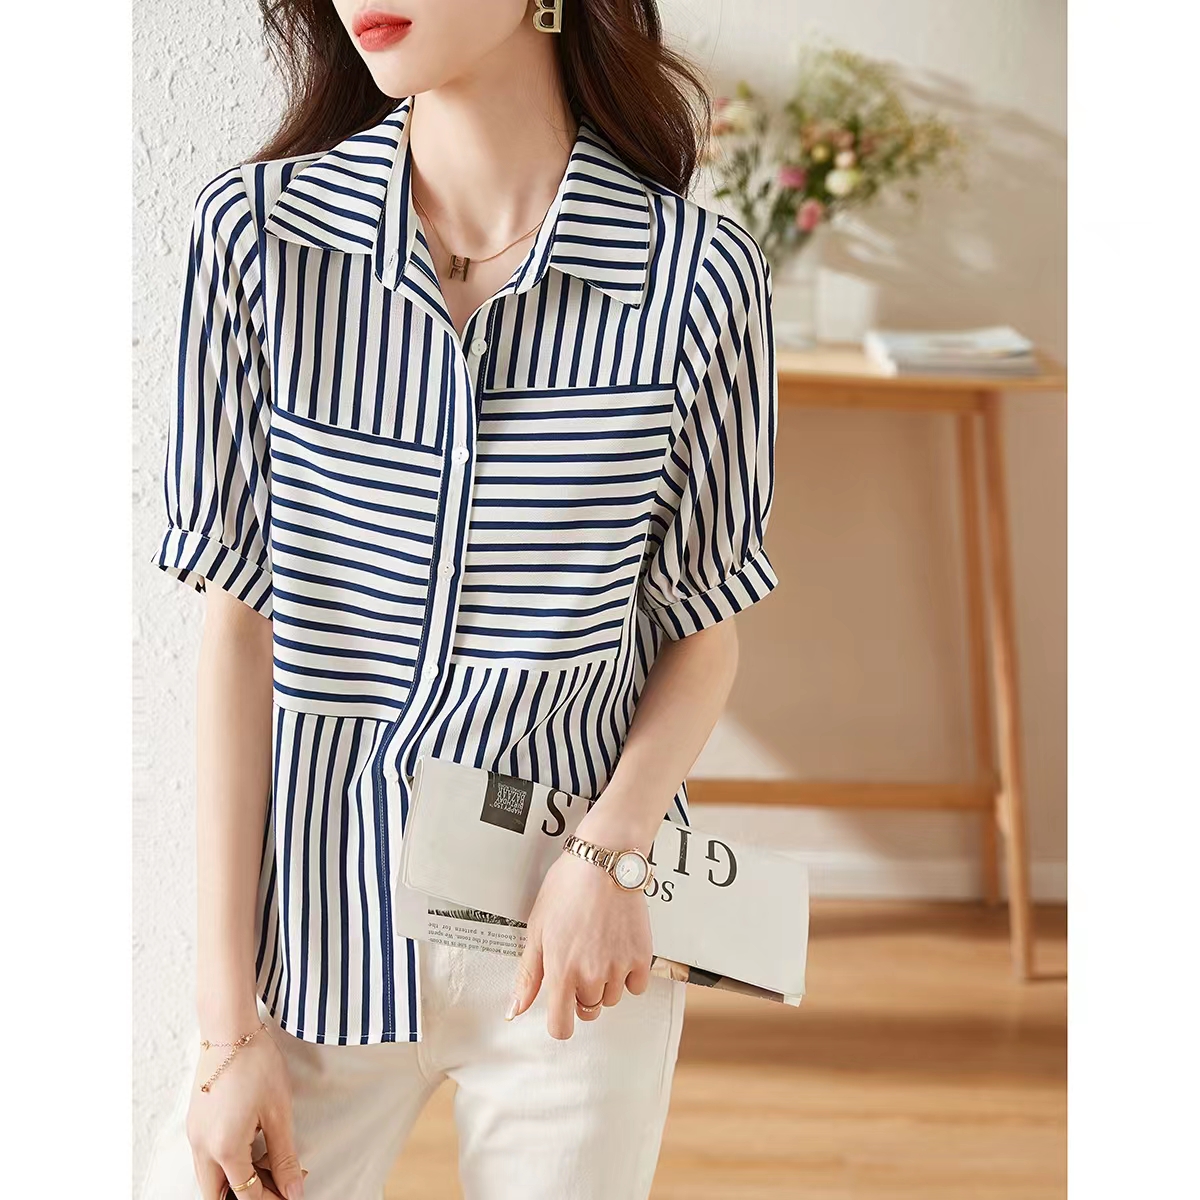 Cozy all-match breathable stripe loose shirt for women